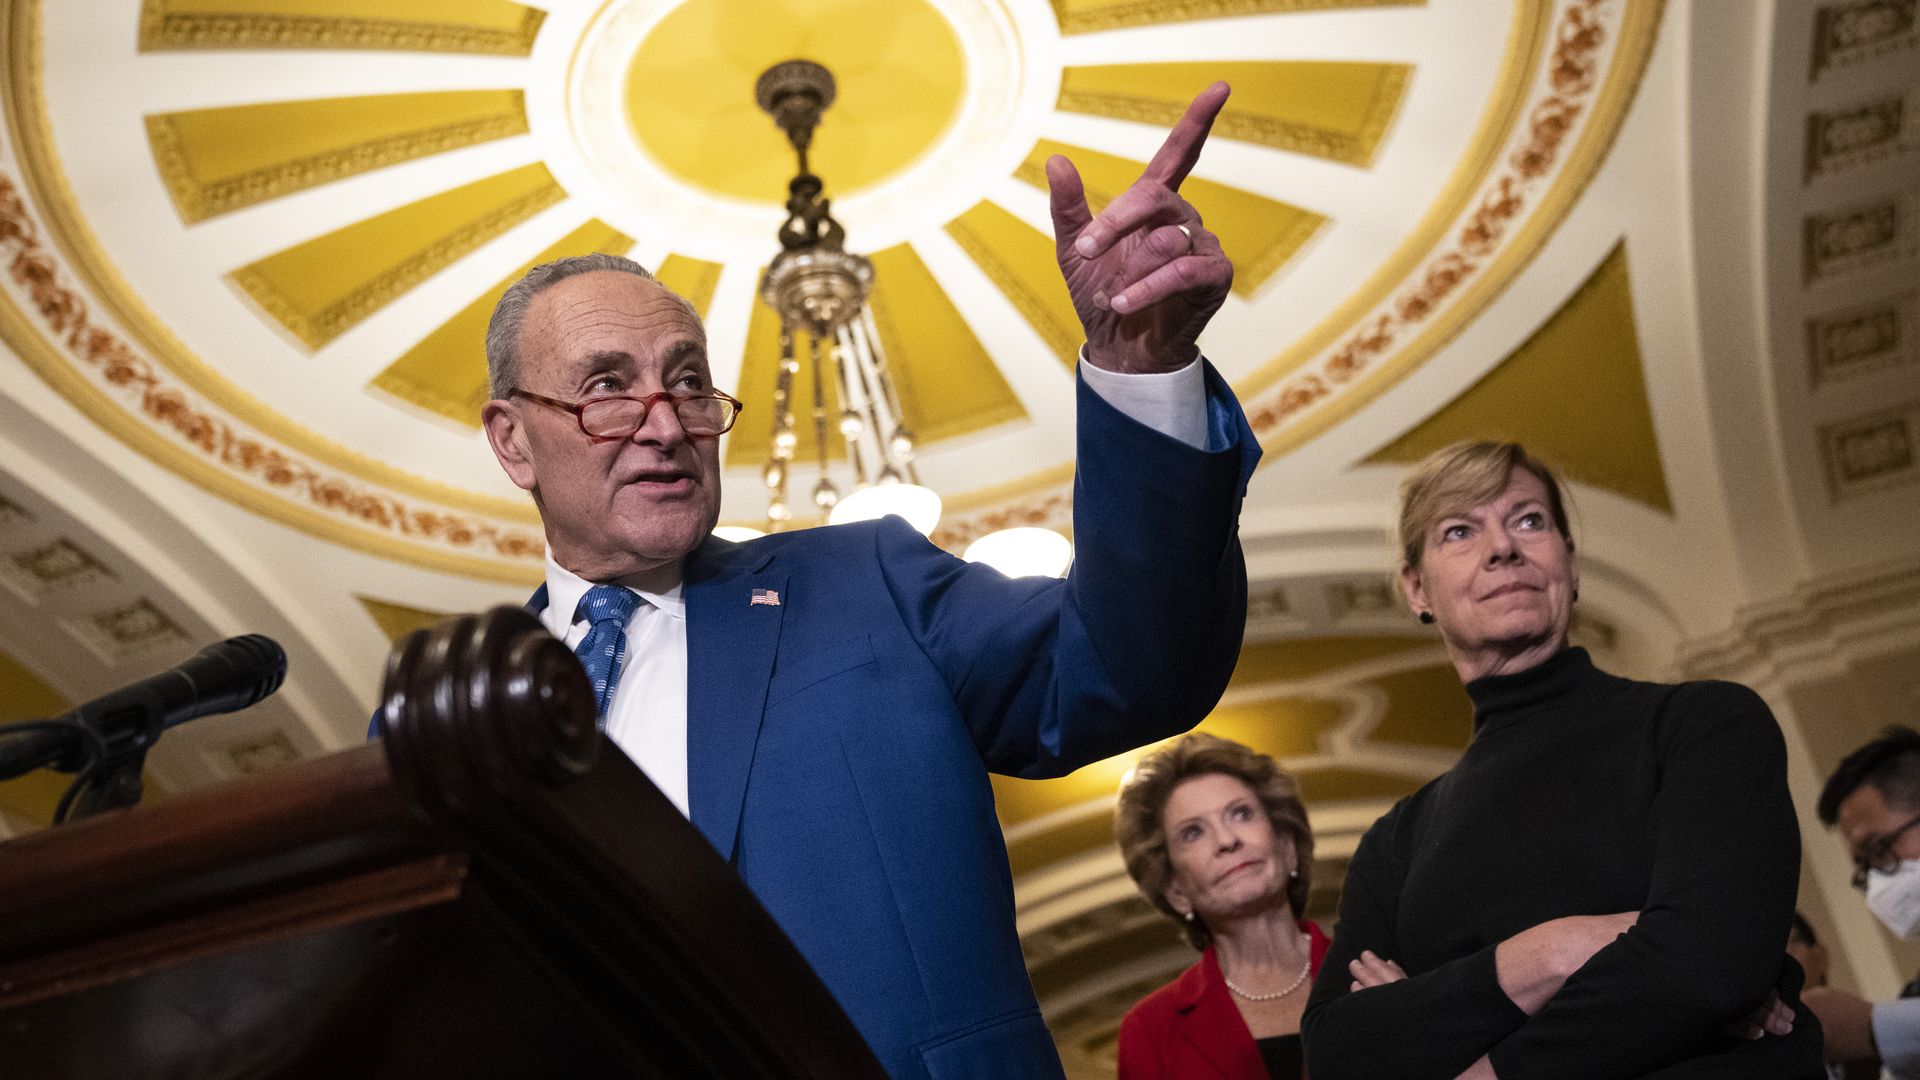 Senate Majority Leader Chuck Schumer and Sens. Debbie Stabenow and Tammy Baldwin at a press conference.